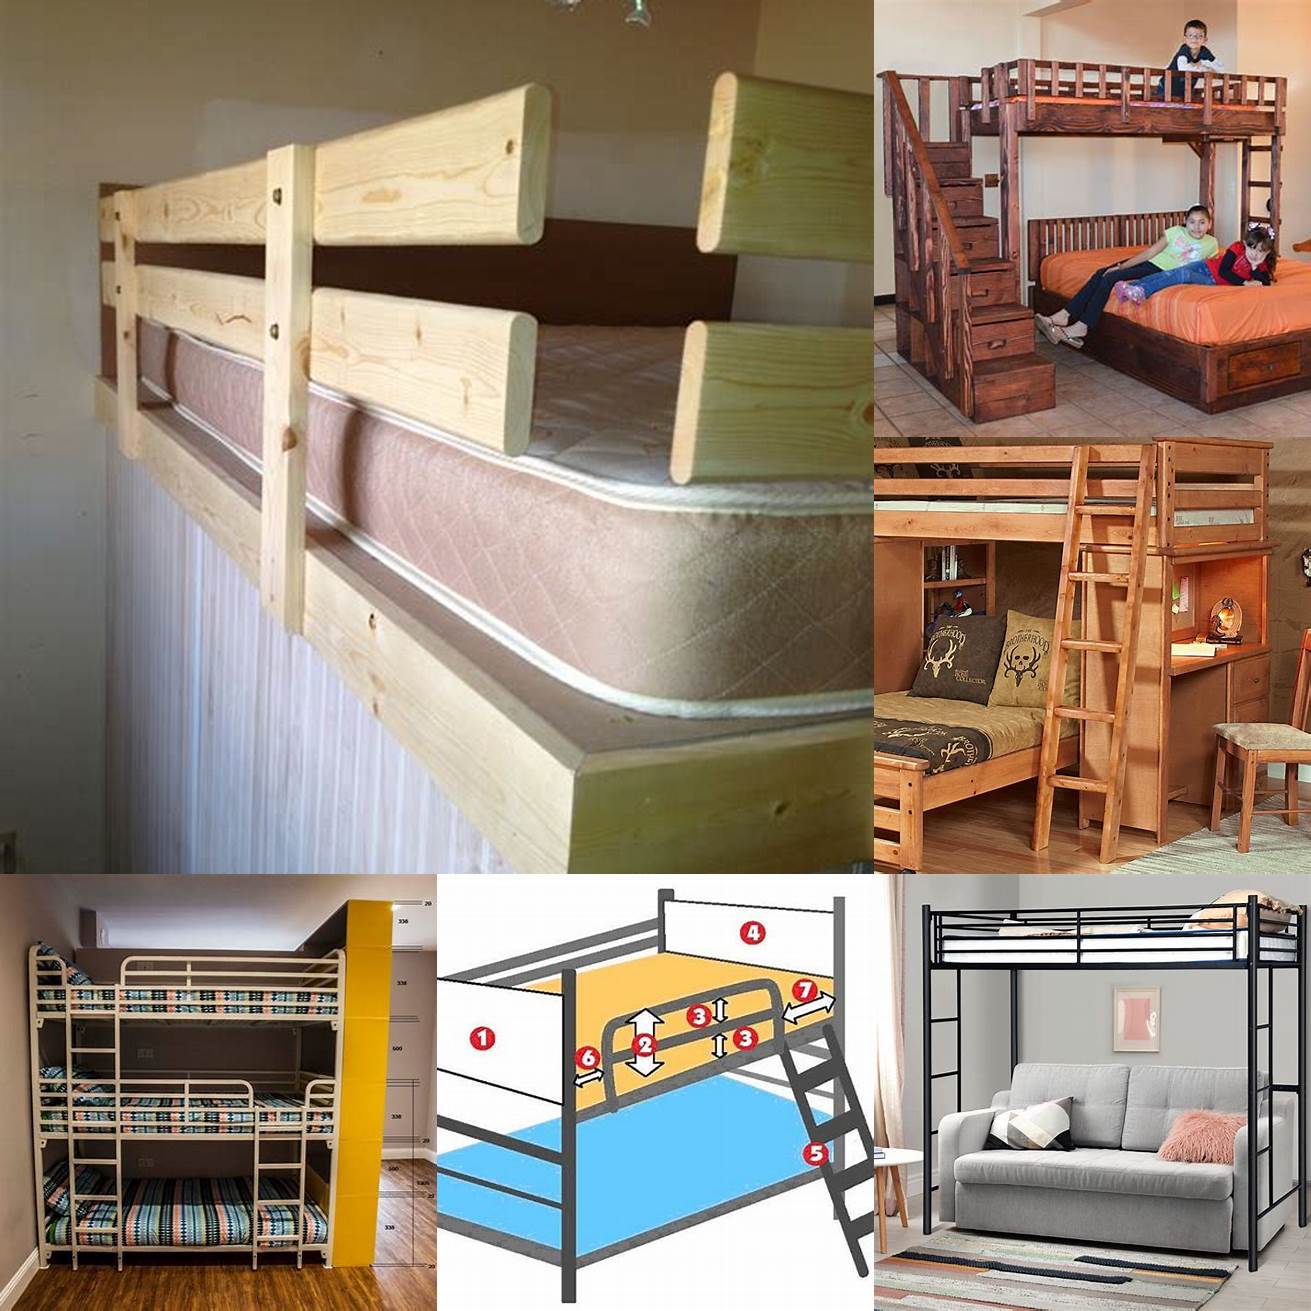 Safety Make sure the bunk bed meets all safety standards and has guardrails on the top bunk